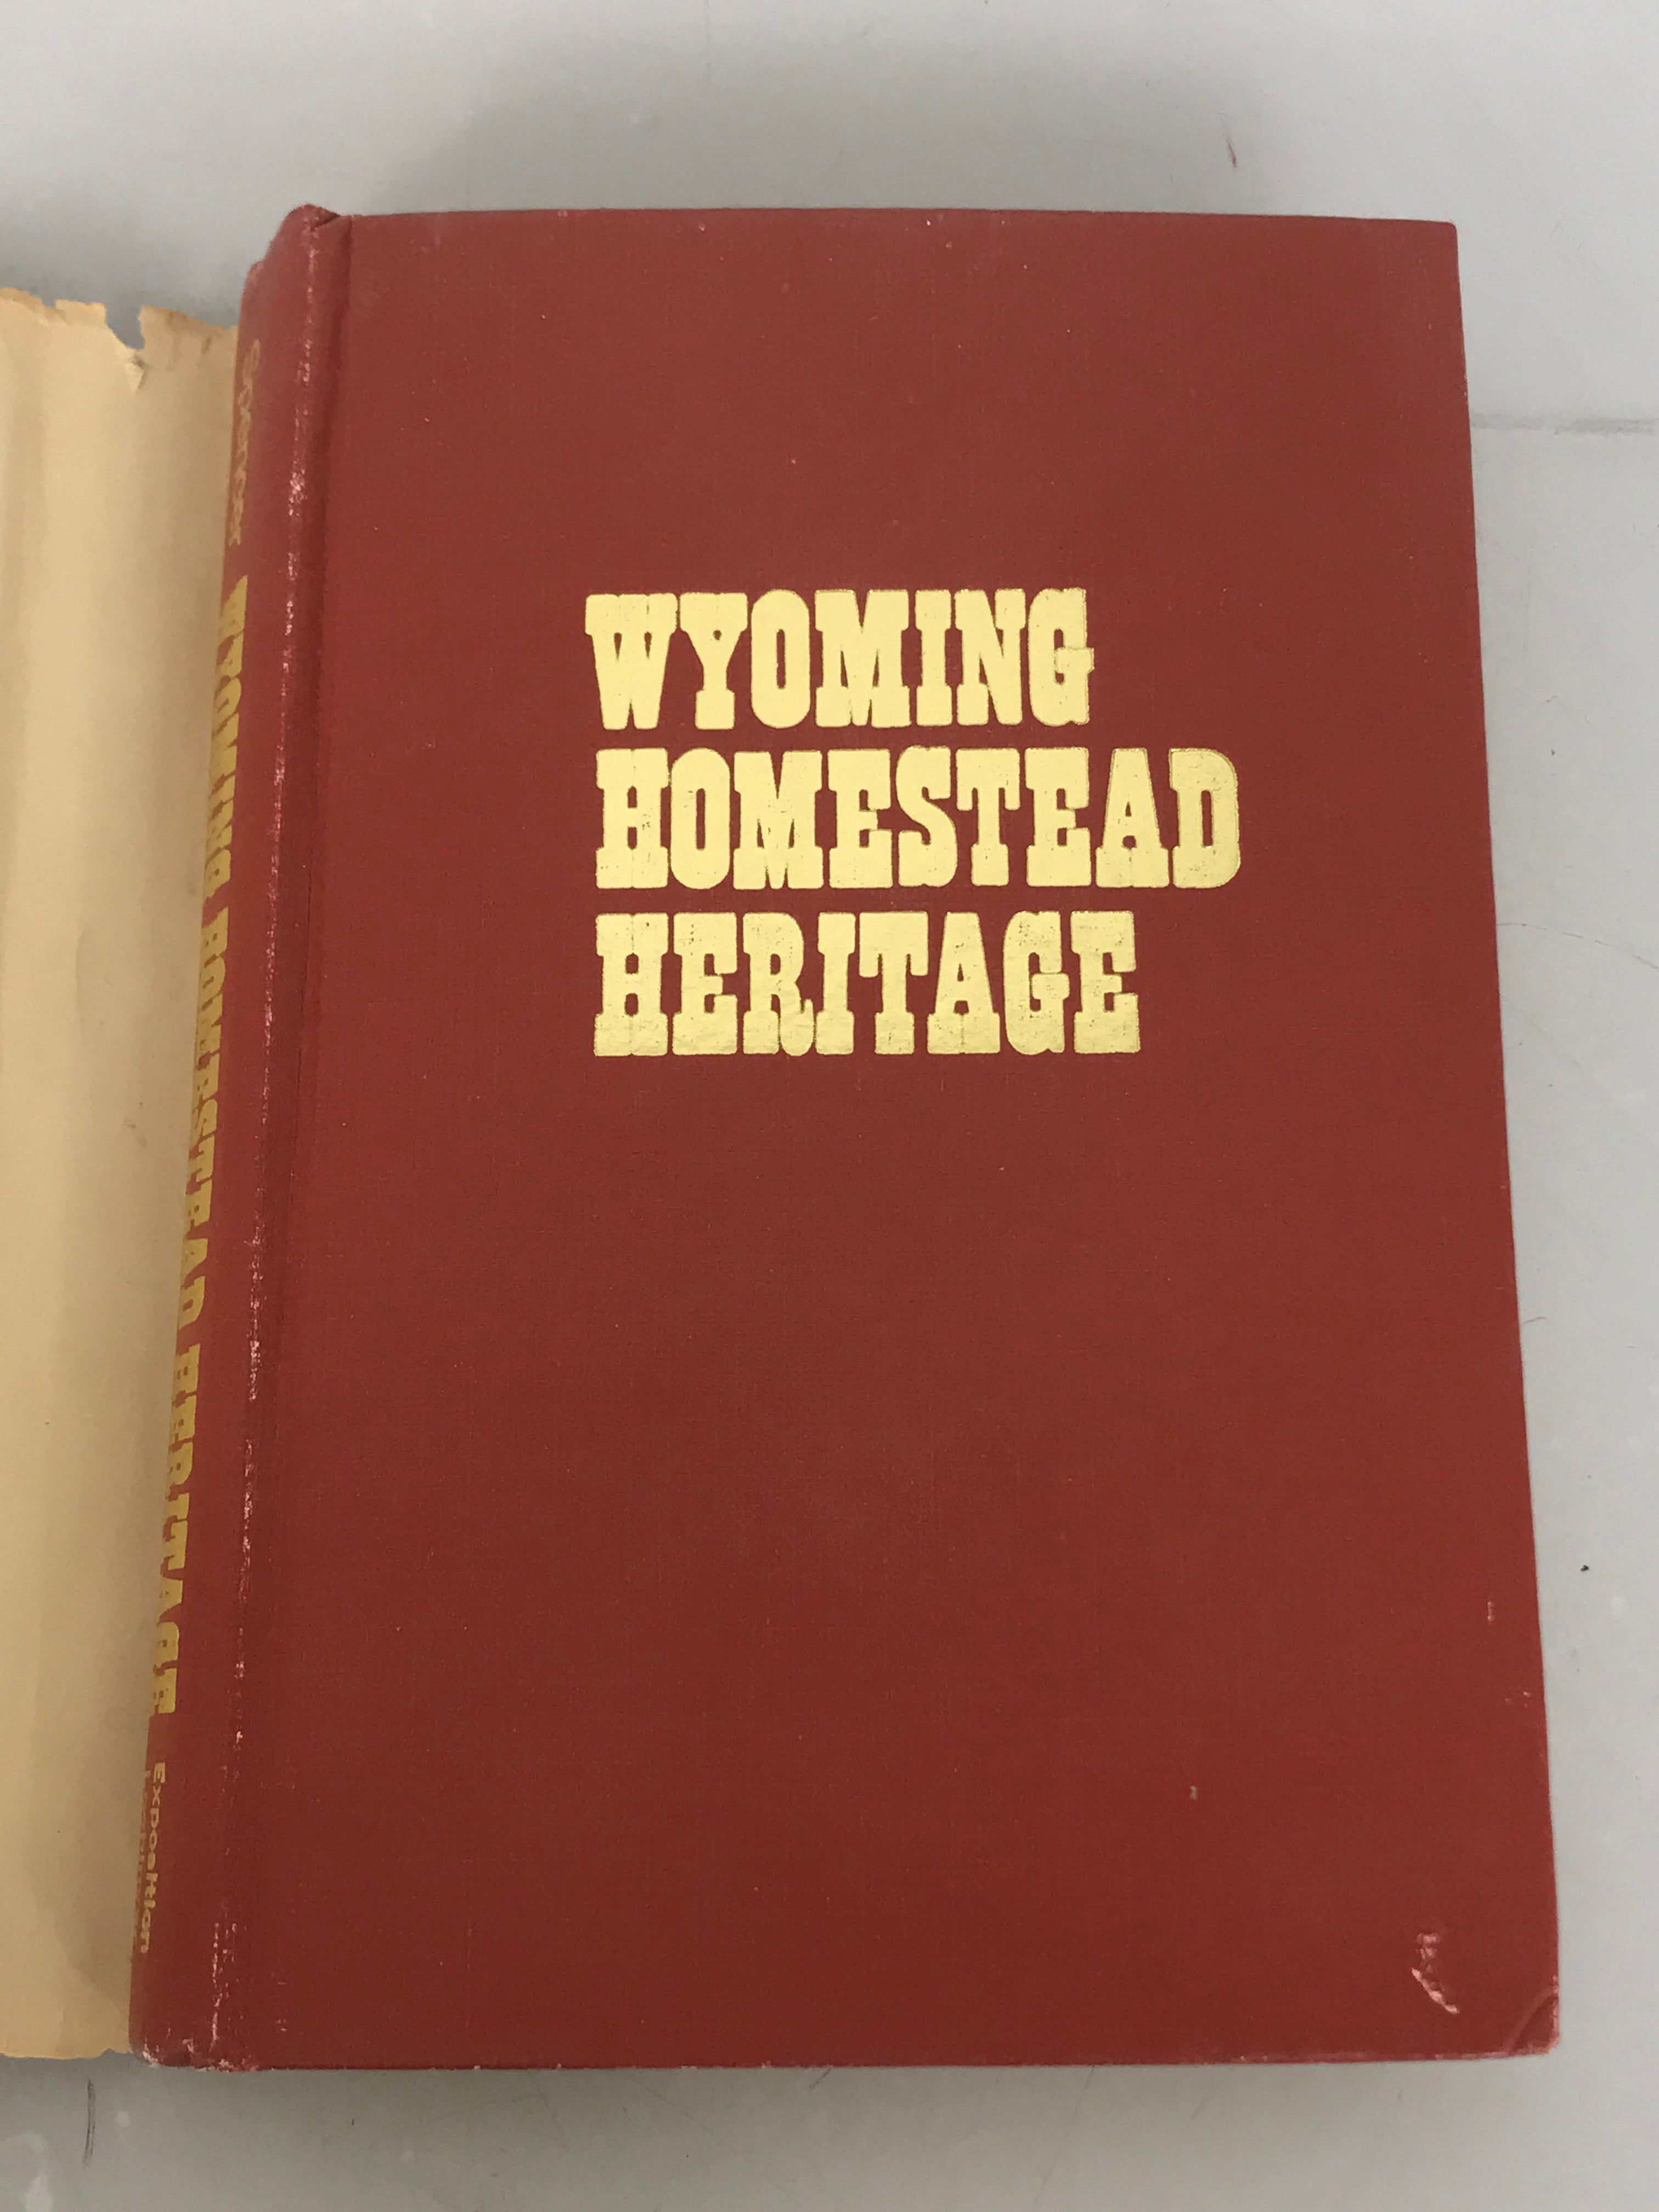 Wyoming Homestead Heritage by Charles Floyd Spencer 1975 Signed First Edition HC DJ